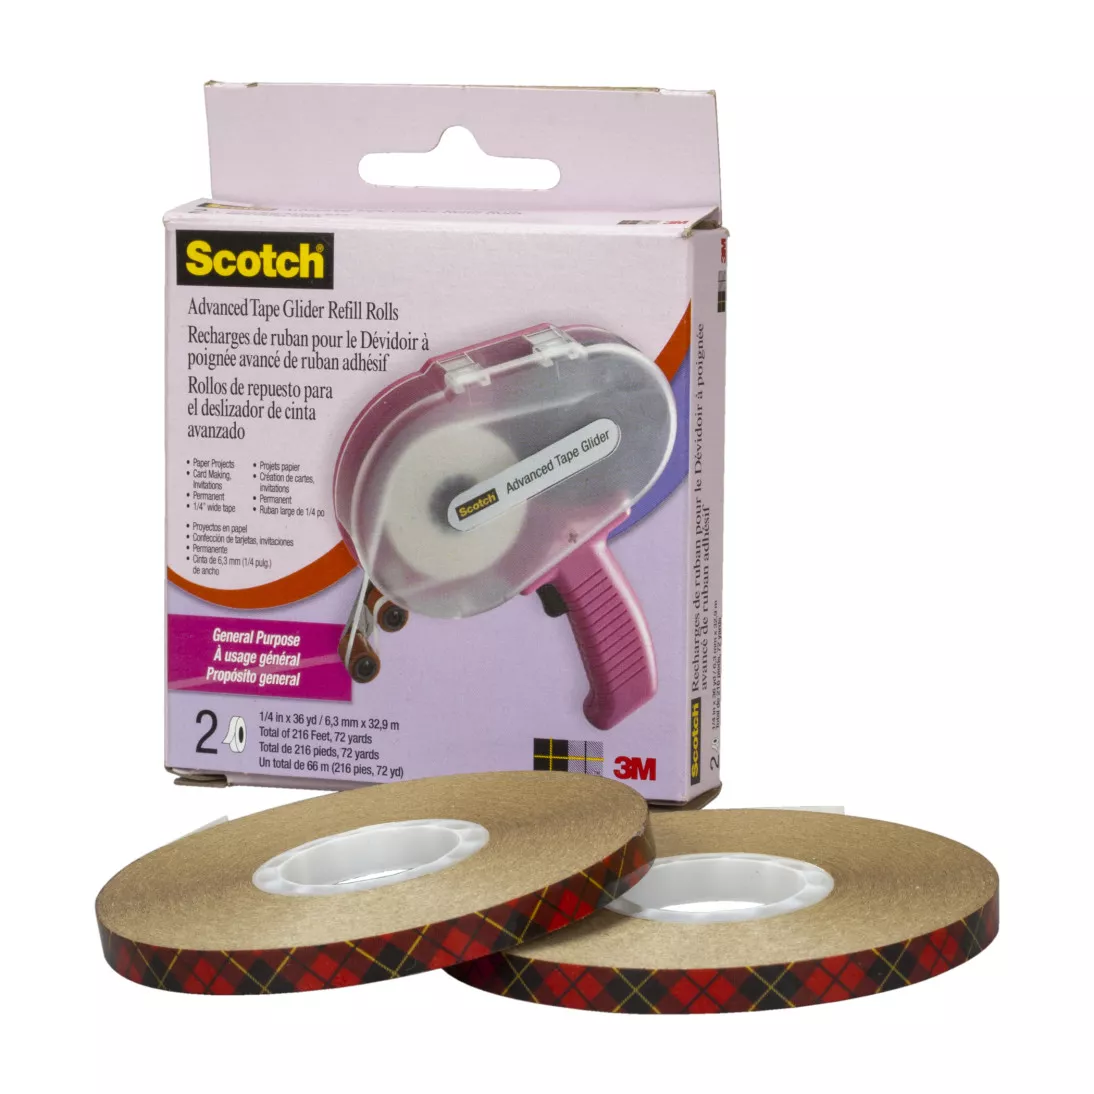 Scotch® Advanced Tape Glider, Pink Applicator with 2 rolls of 1/4 Inch tape, Cat 085, 6 Kits/Case